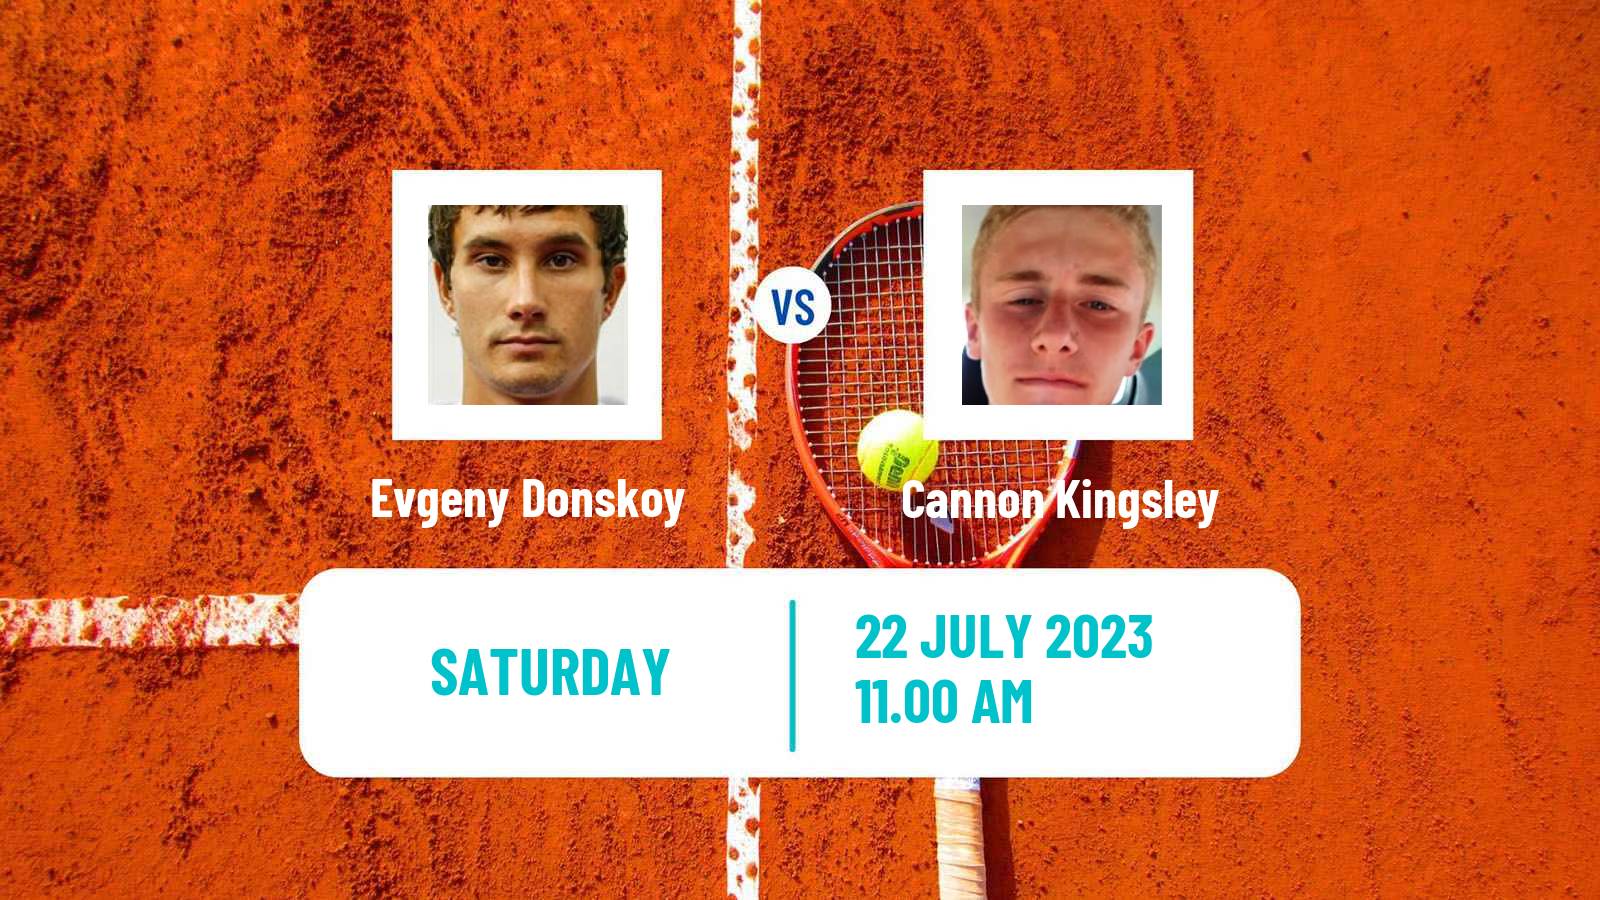 Tennis ITF M25 Champaign Il Men Evgeny Donskoy - Cannon Kingsley